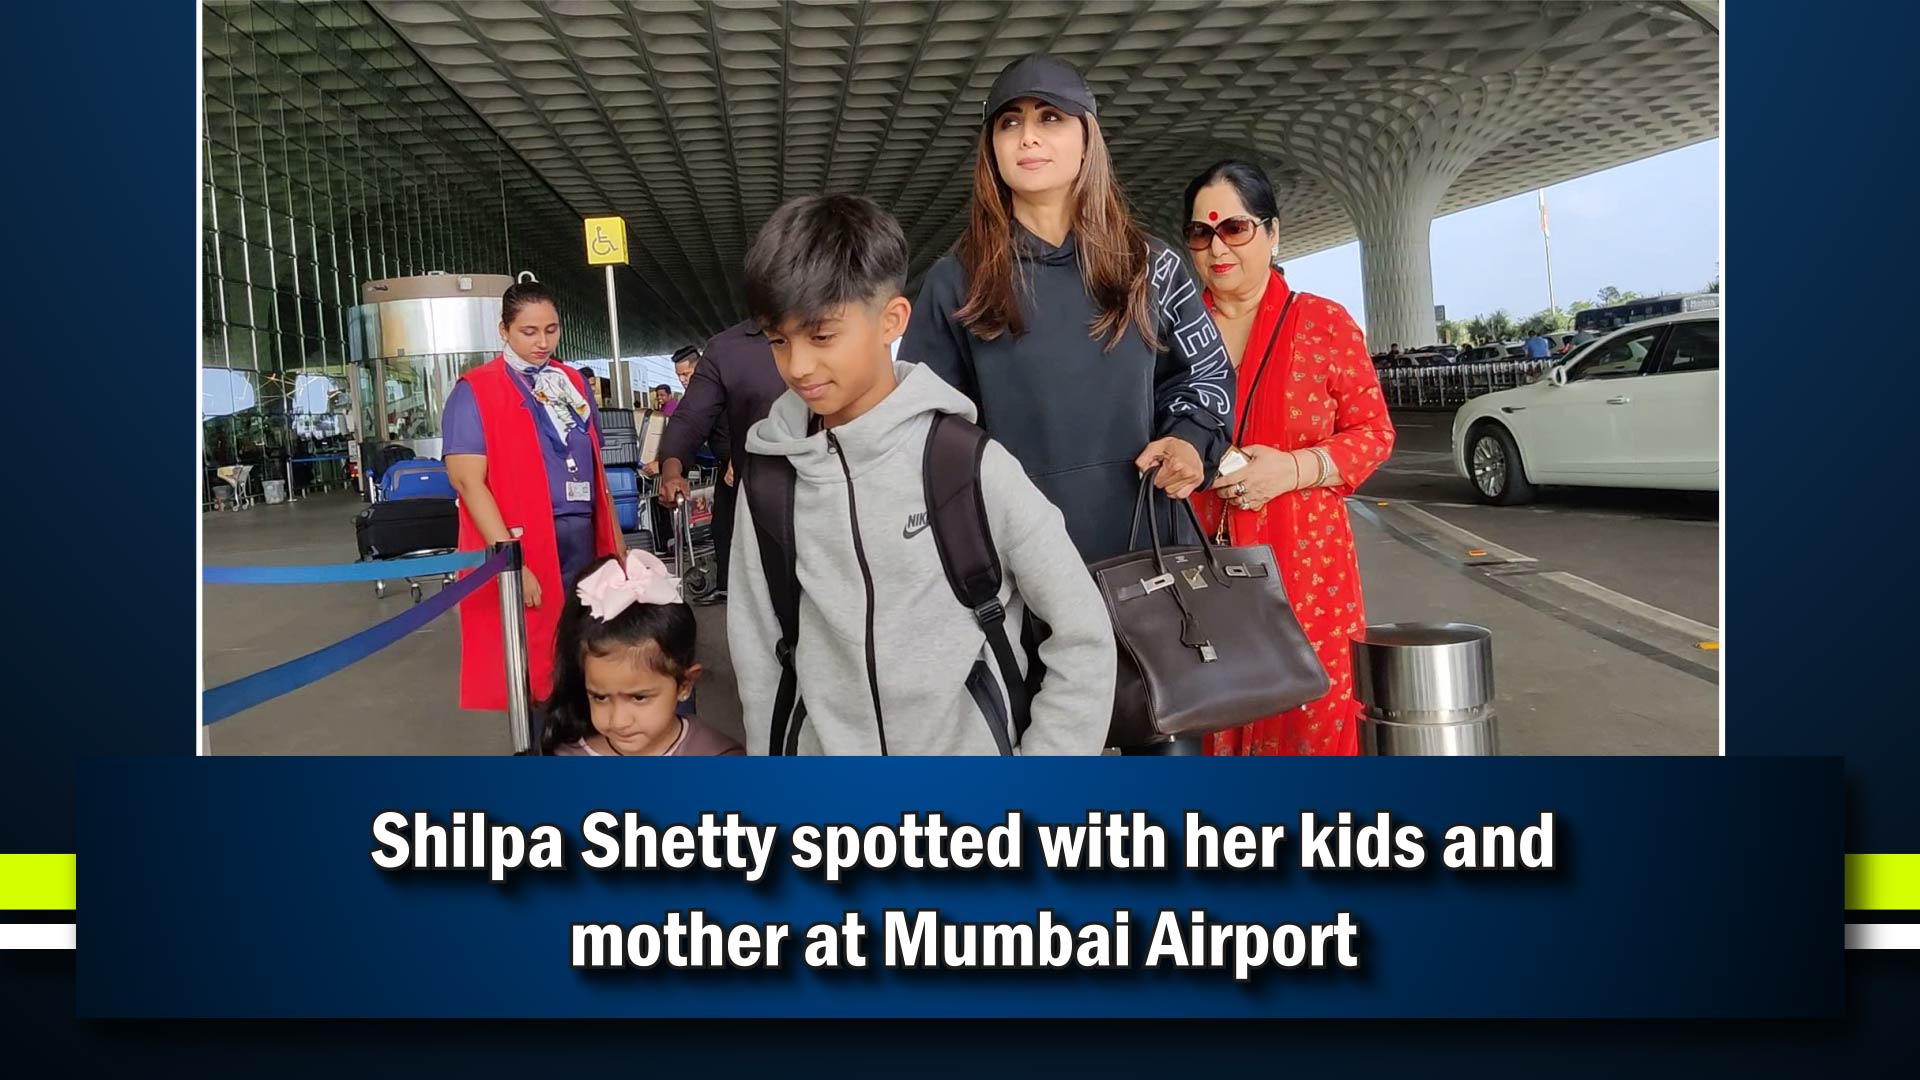 Shilpa Shetty spotted with her kids and mother at Mumbai Airport